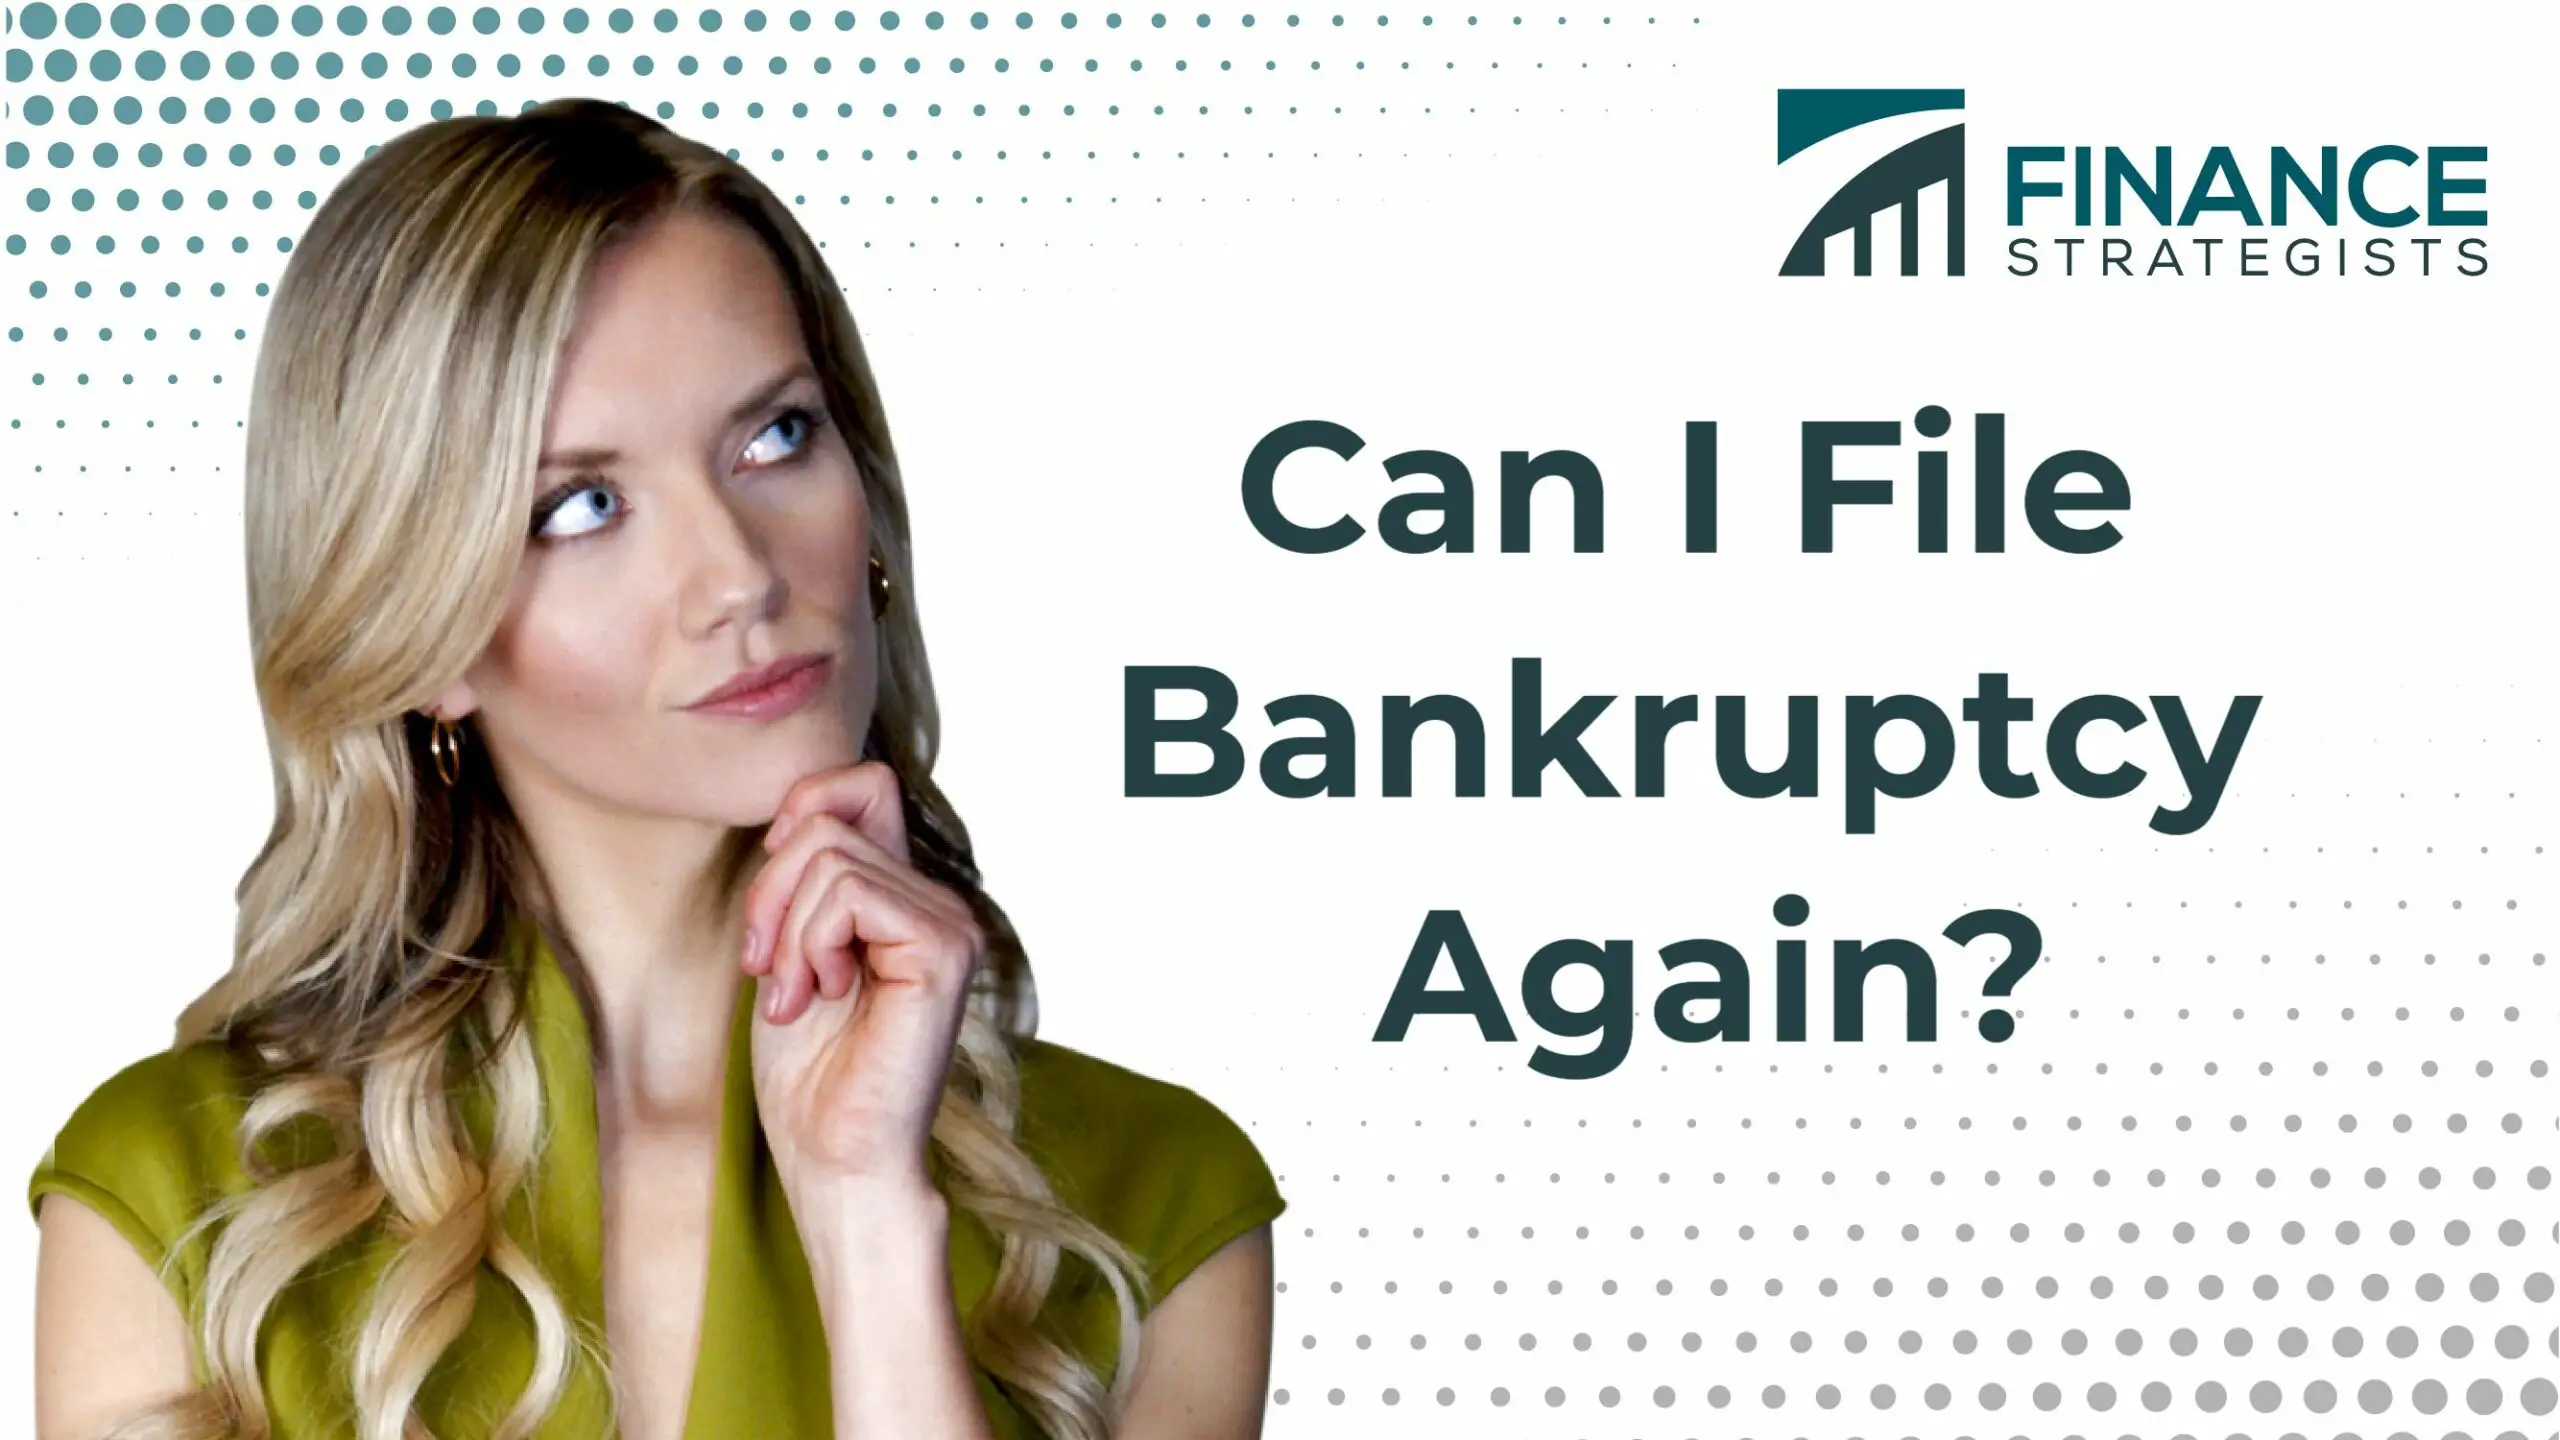 Can I File Bankruptcy Again?